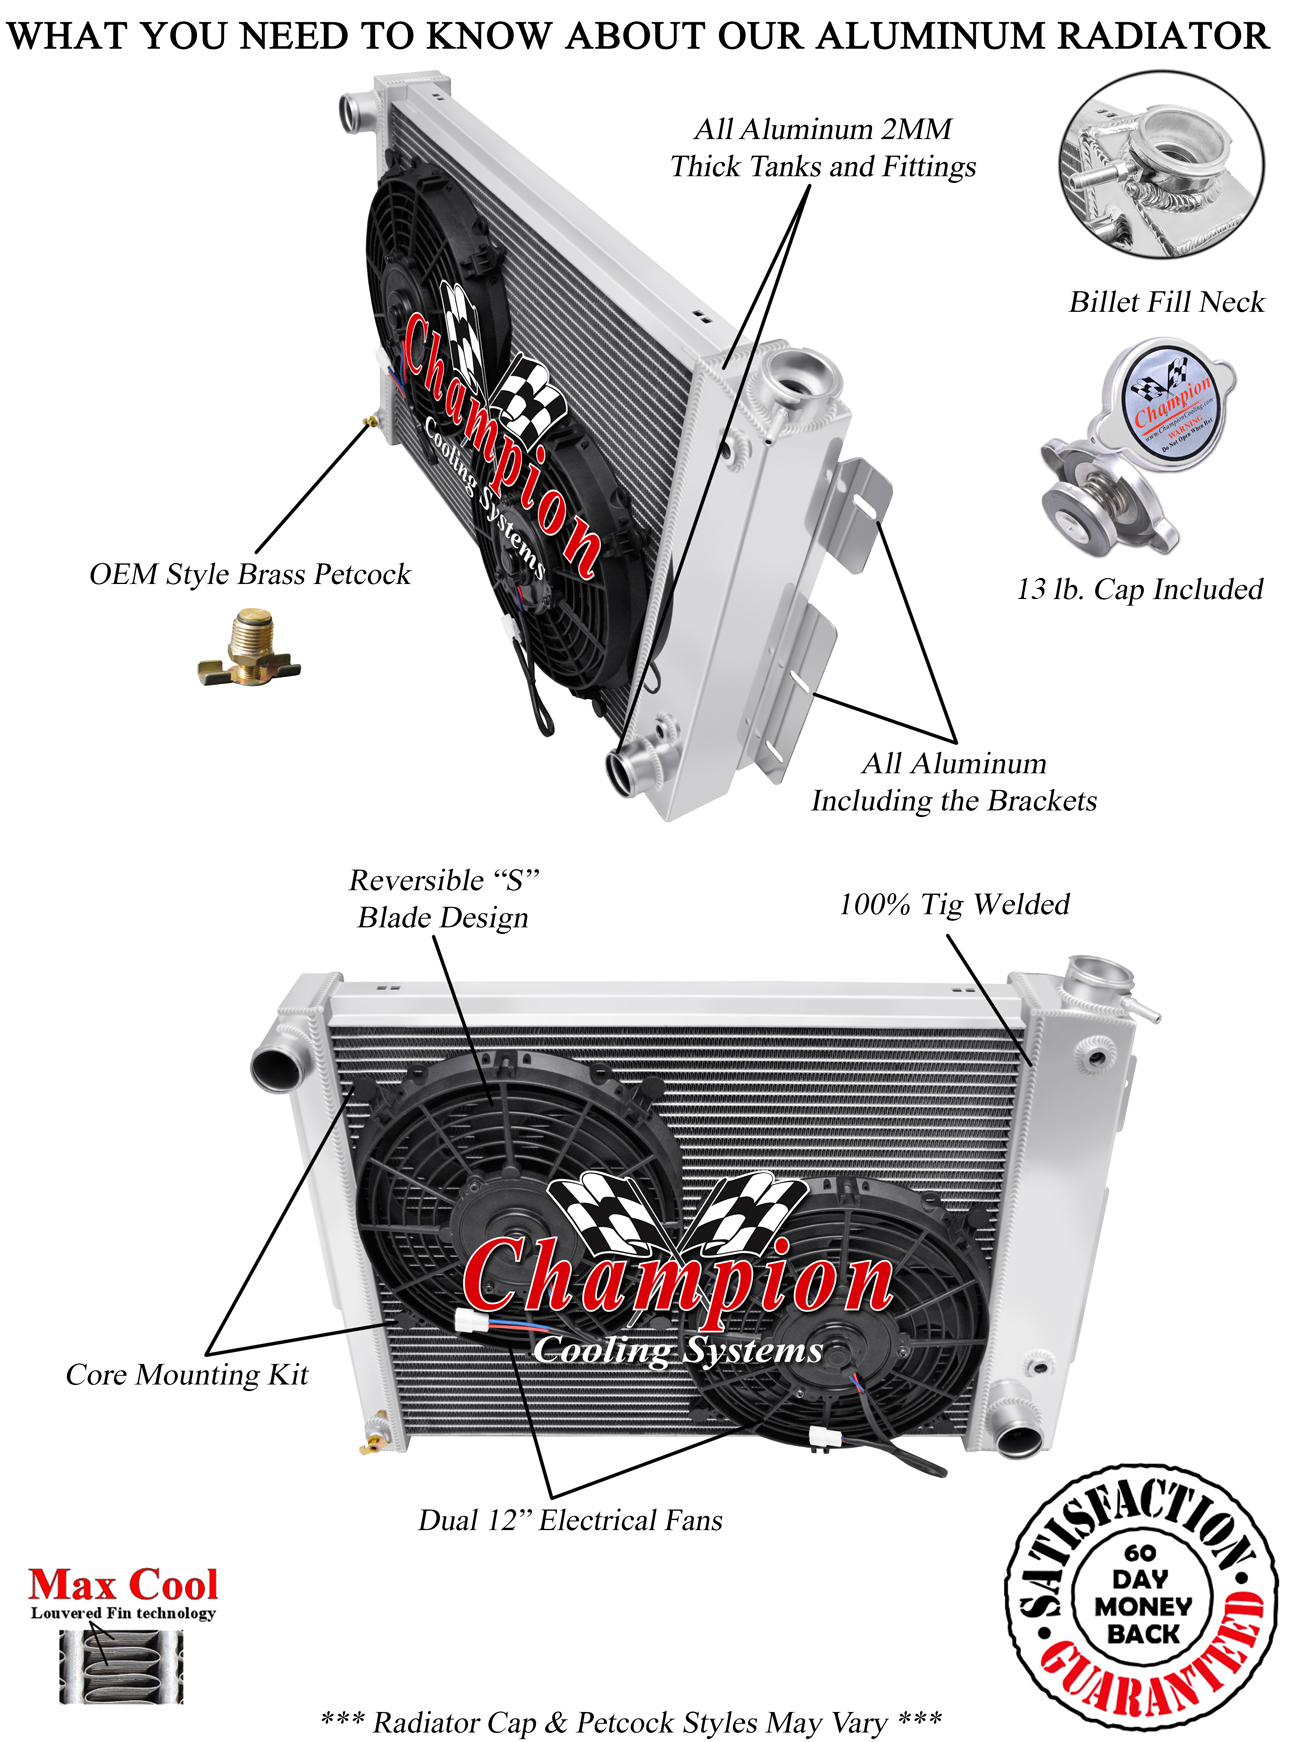 https://www.championcooling.com/photos/Photos%20White/With%20Fans/Combos/337/337-571_white_champion_diagram.jpg